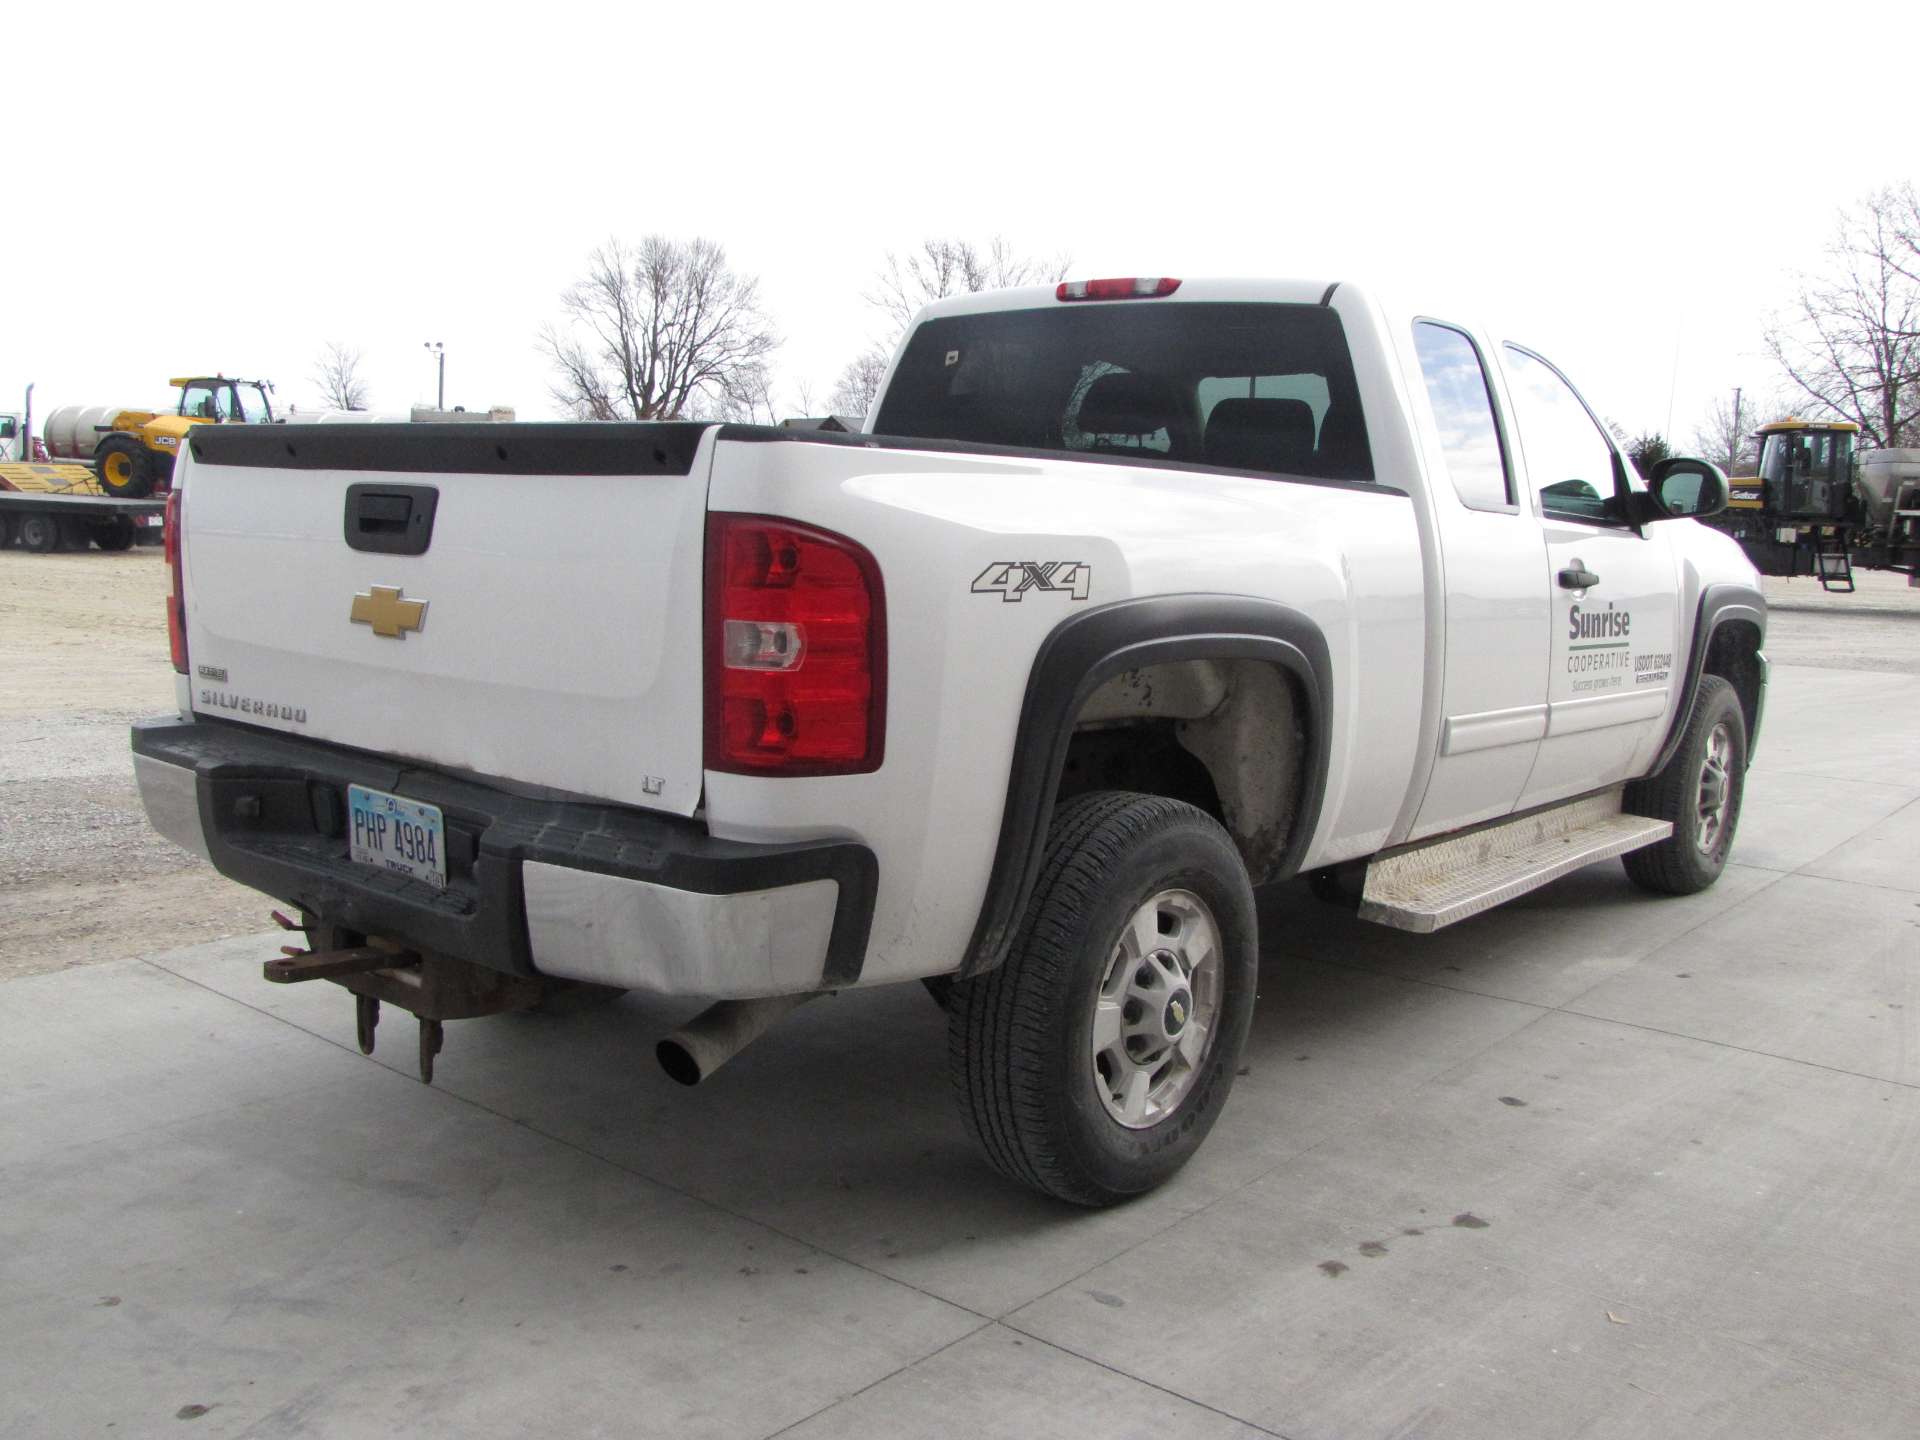 2012 Chevy 2500 HD pickup truck - Image 9 of 57